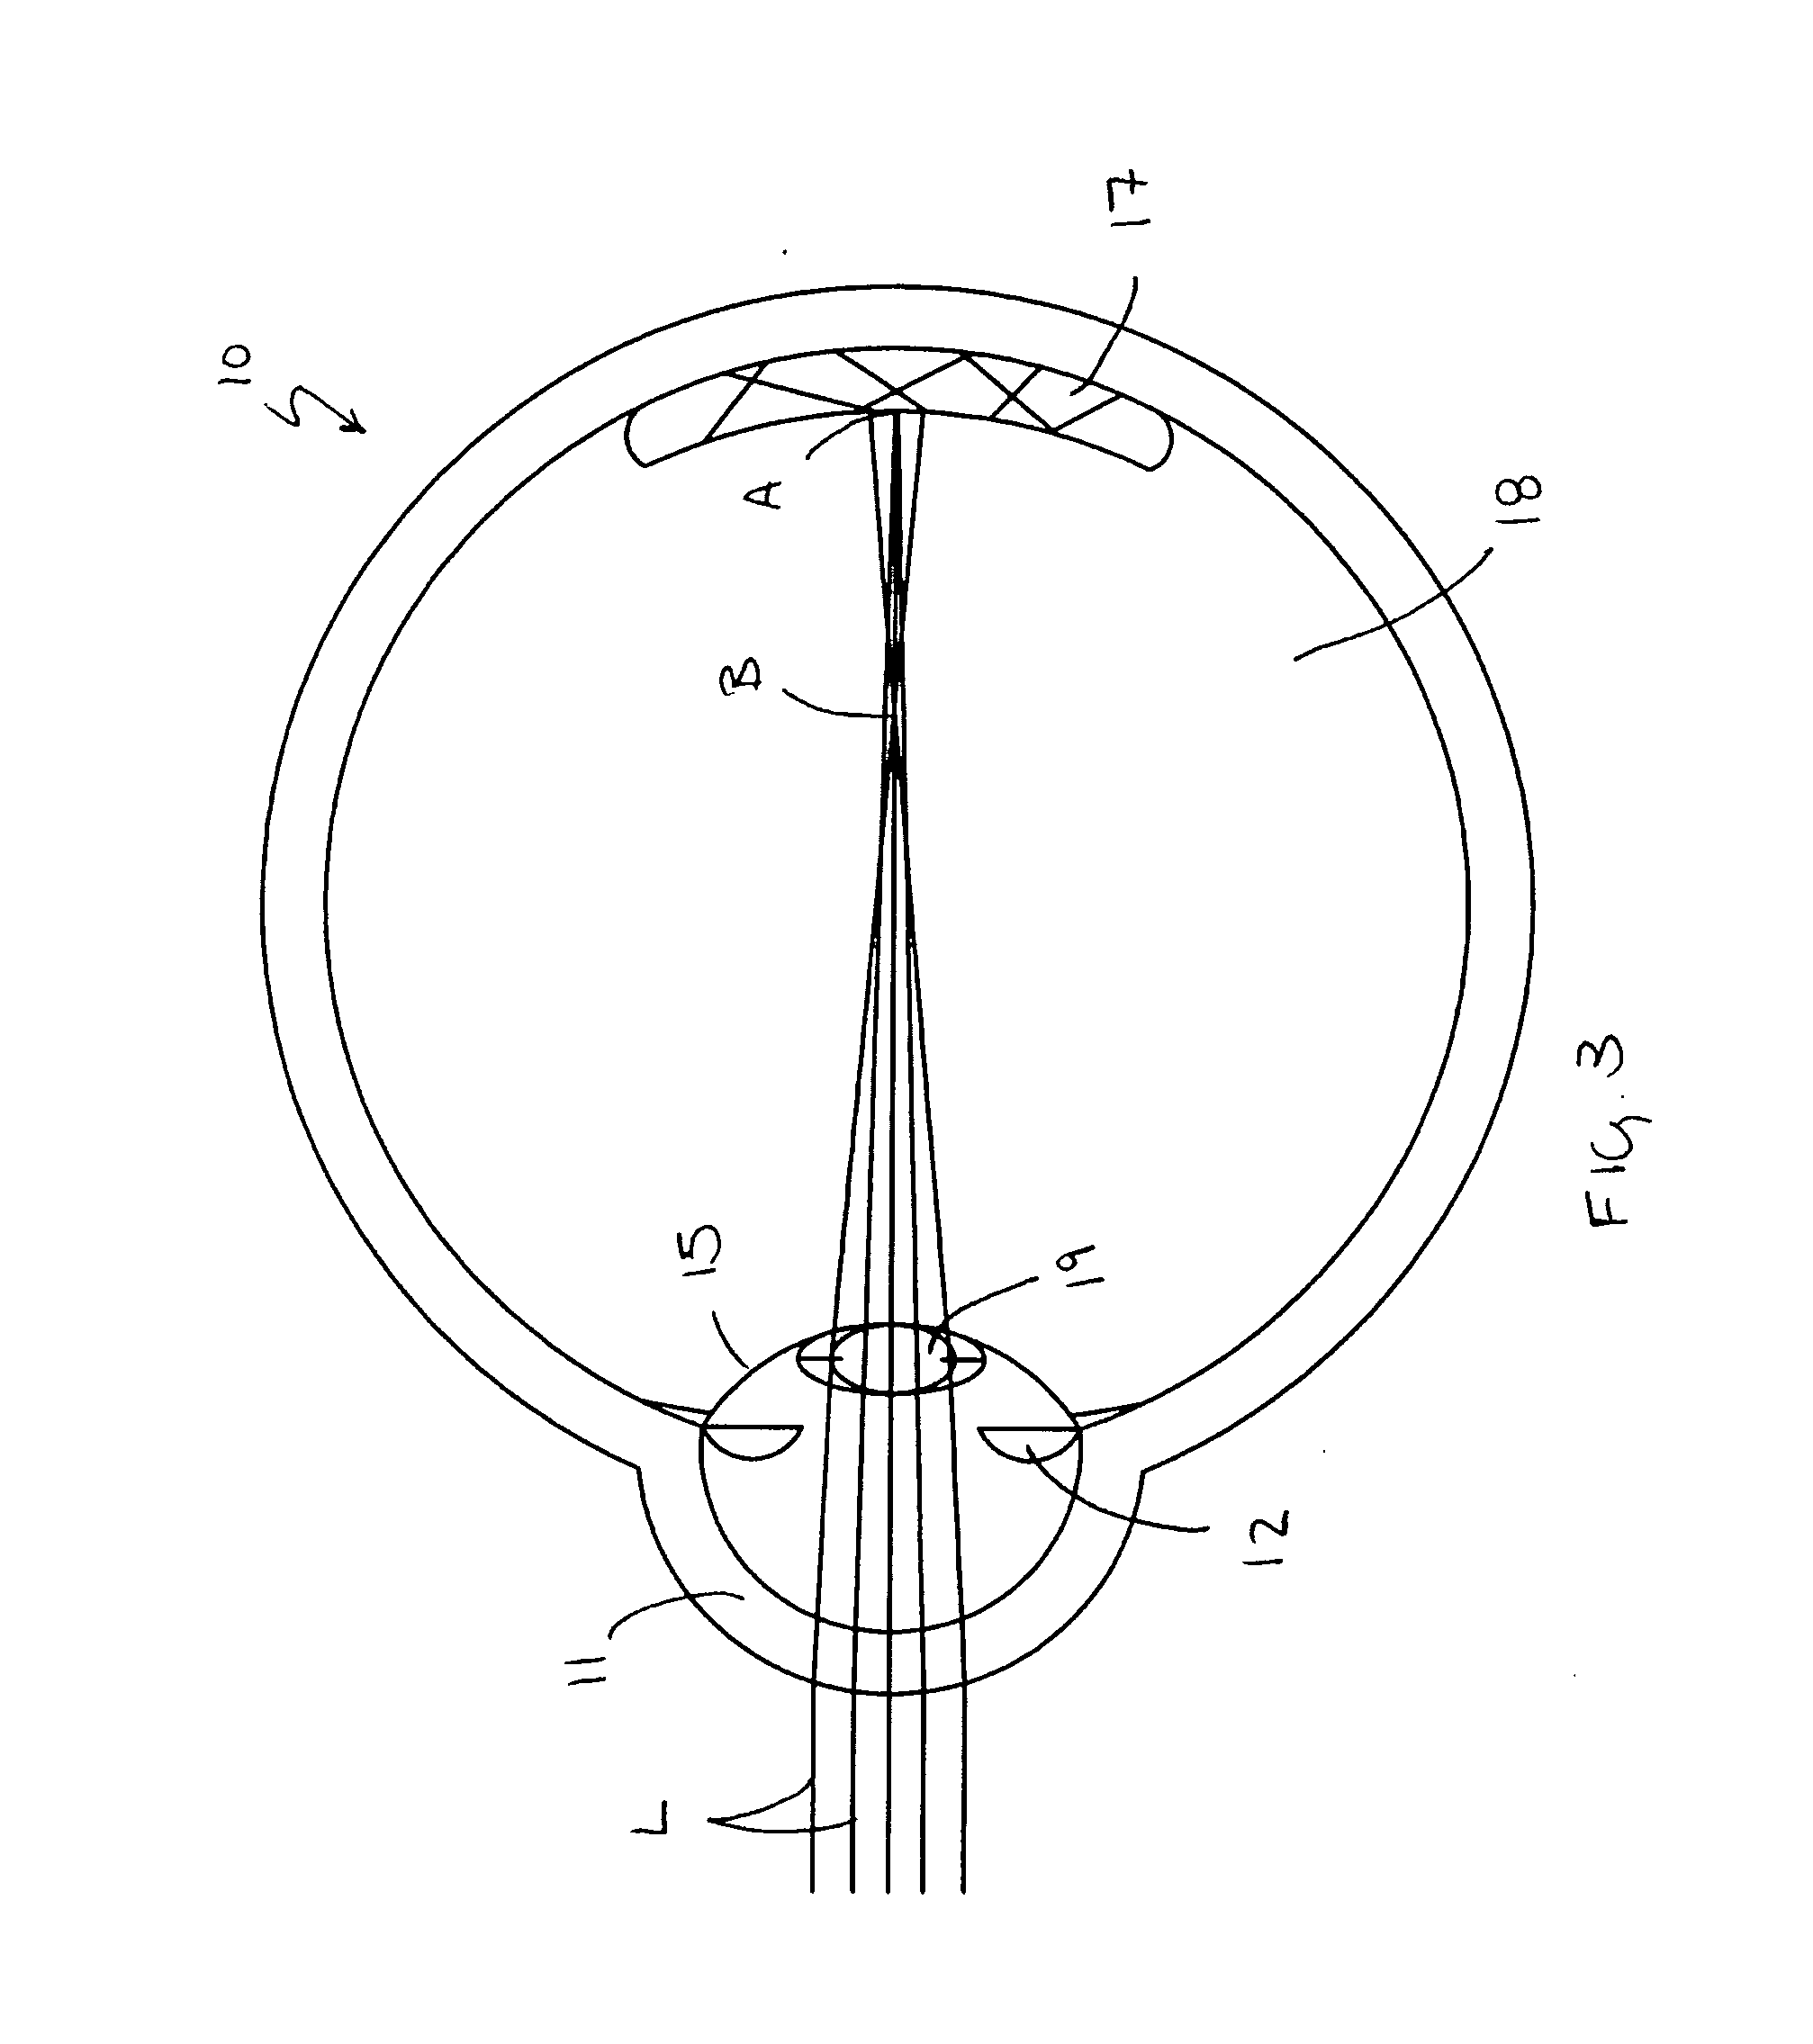 Accommodating intraocular lens system having spherical aberration compensation and method